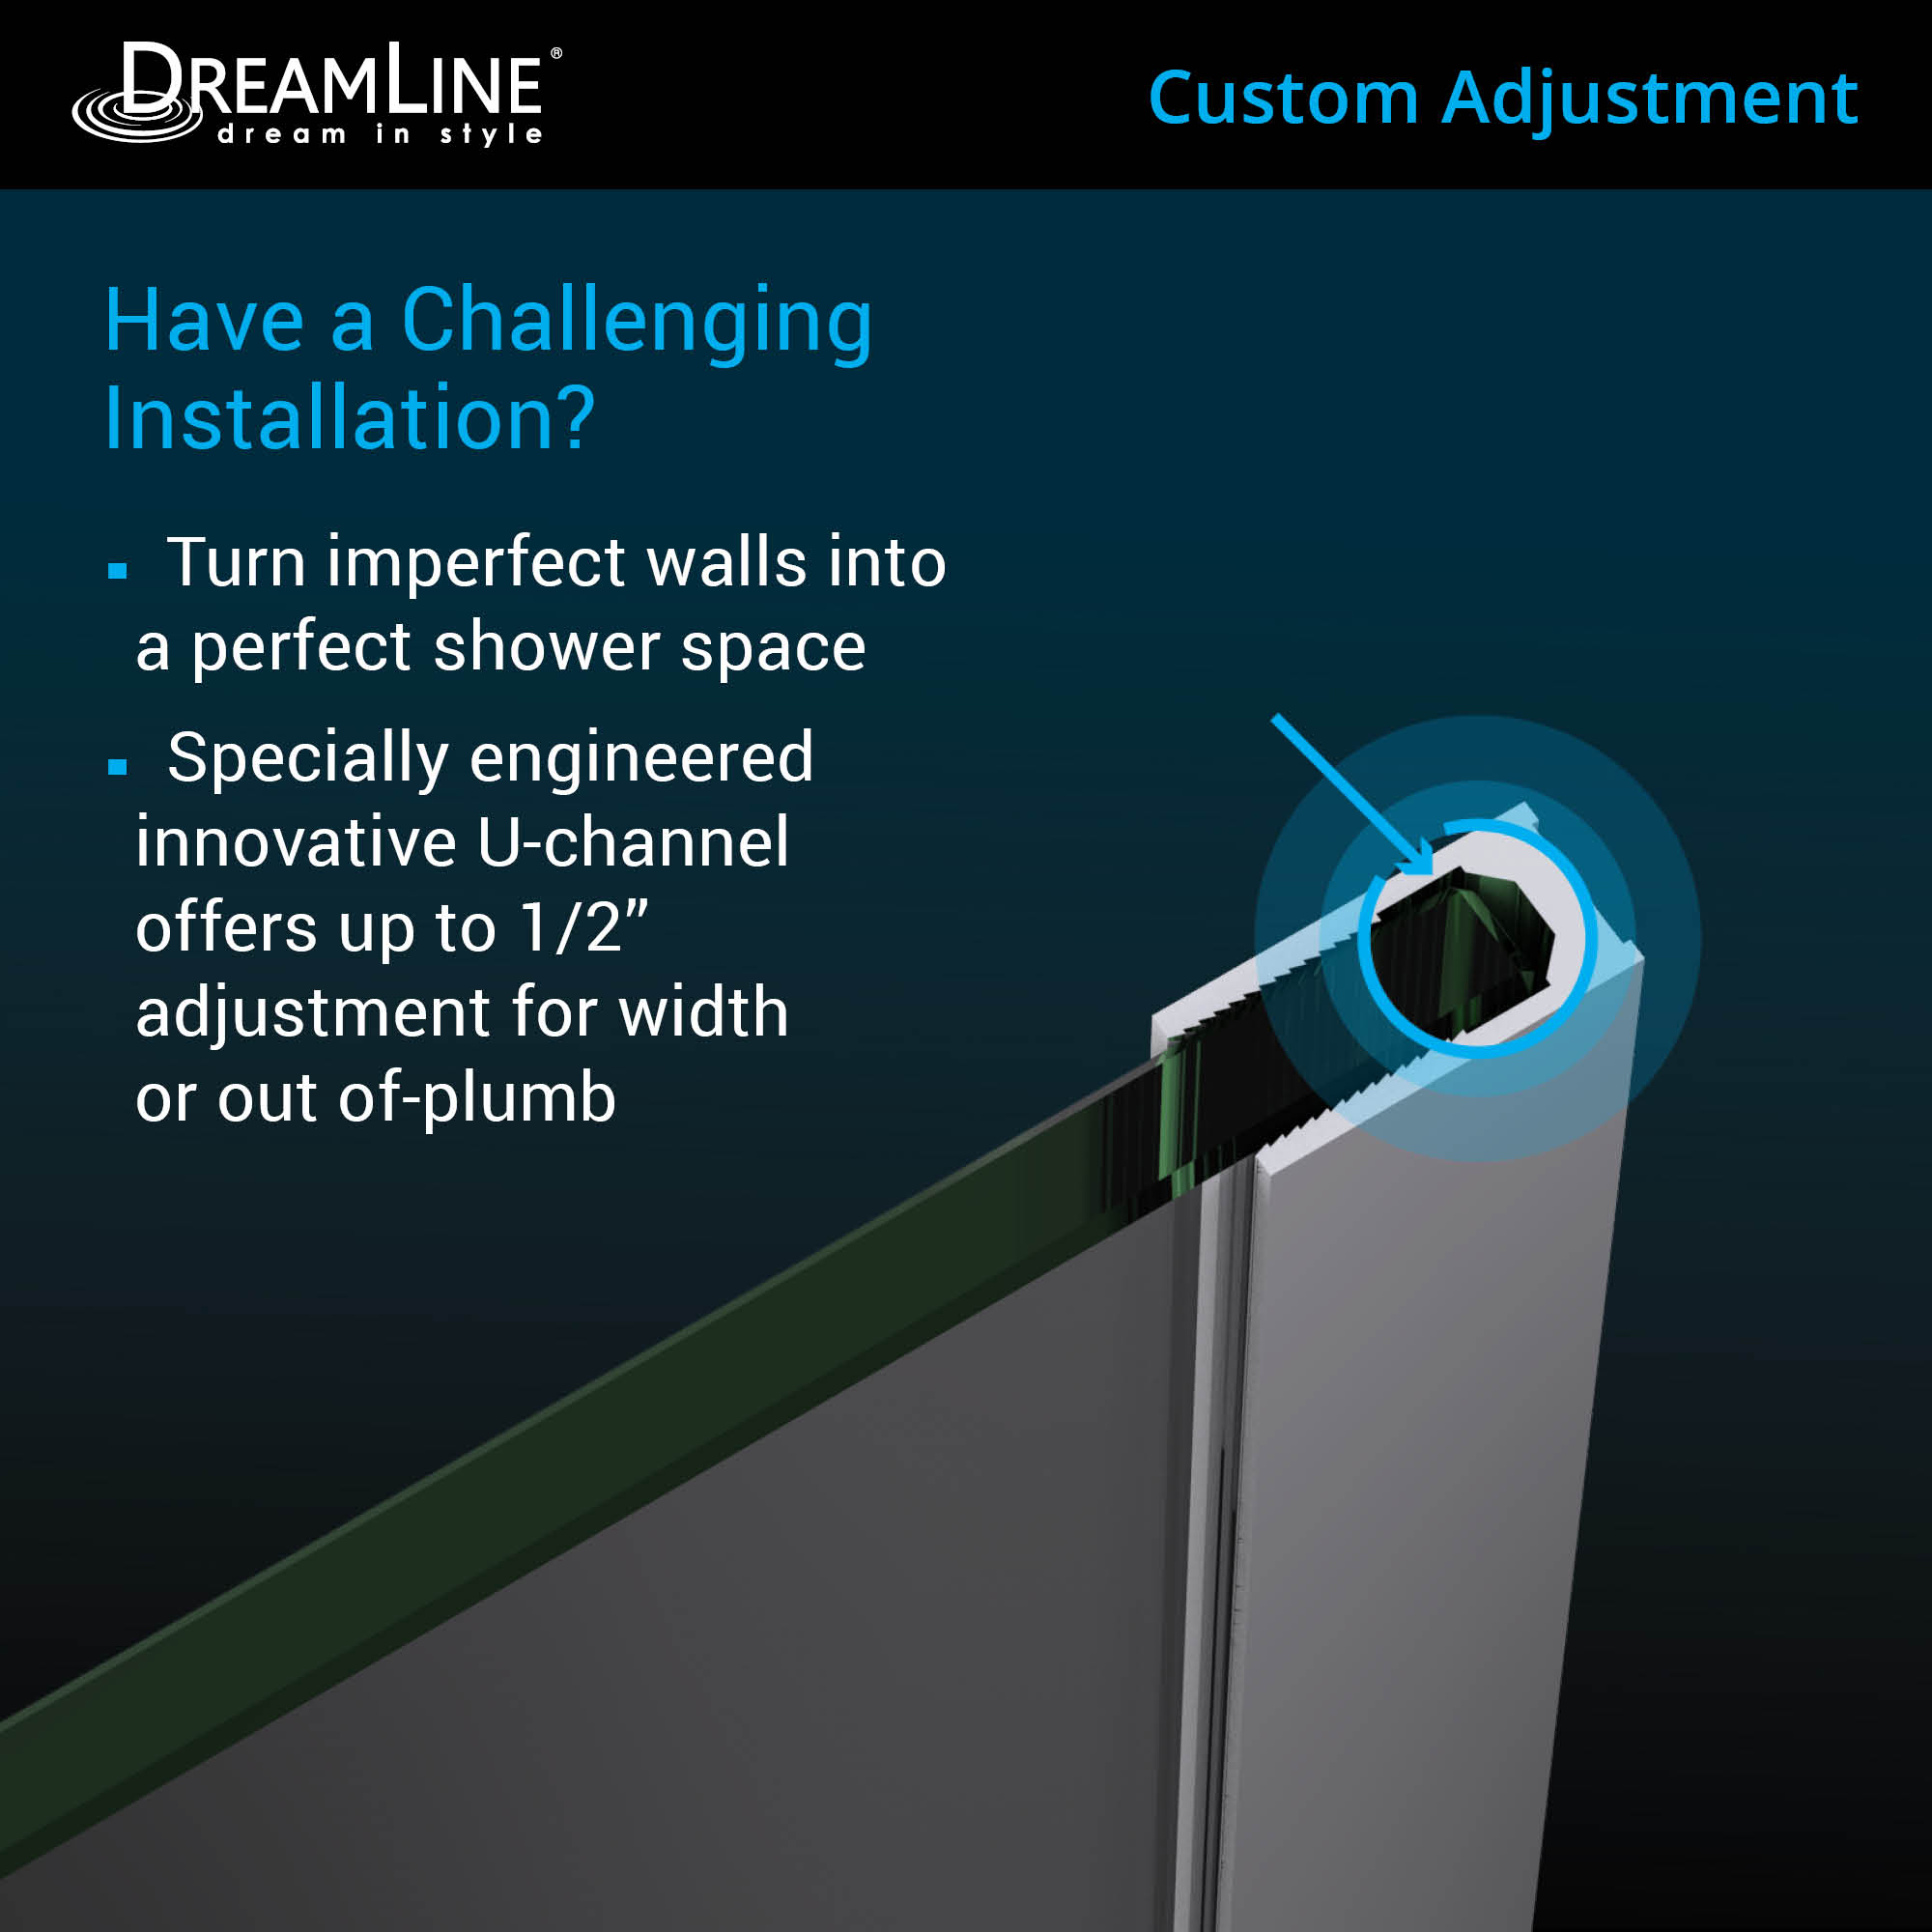 DreamLine Unidoor Plus 58 1/2 in. W x 34 3/8 in. D x 72 in. H Frameless Hinged Shower Enclosure, Clear Glass, Brushed Nickel